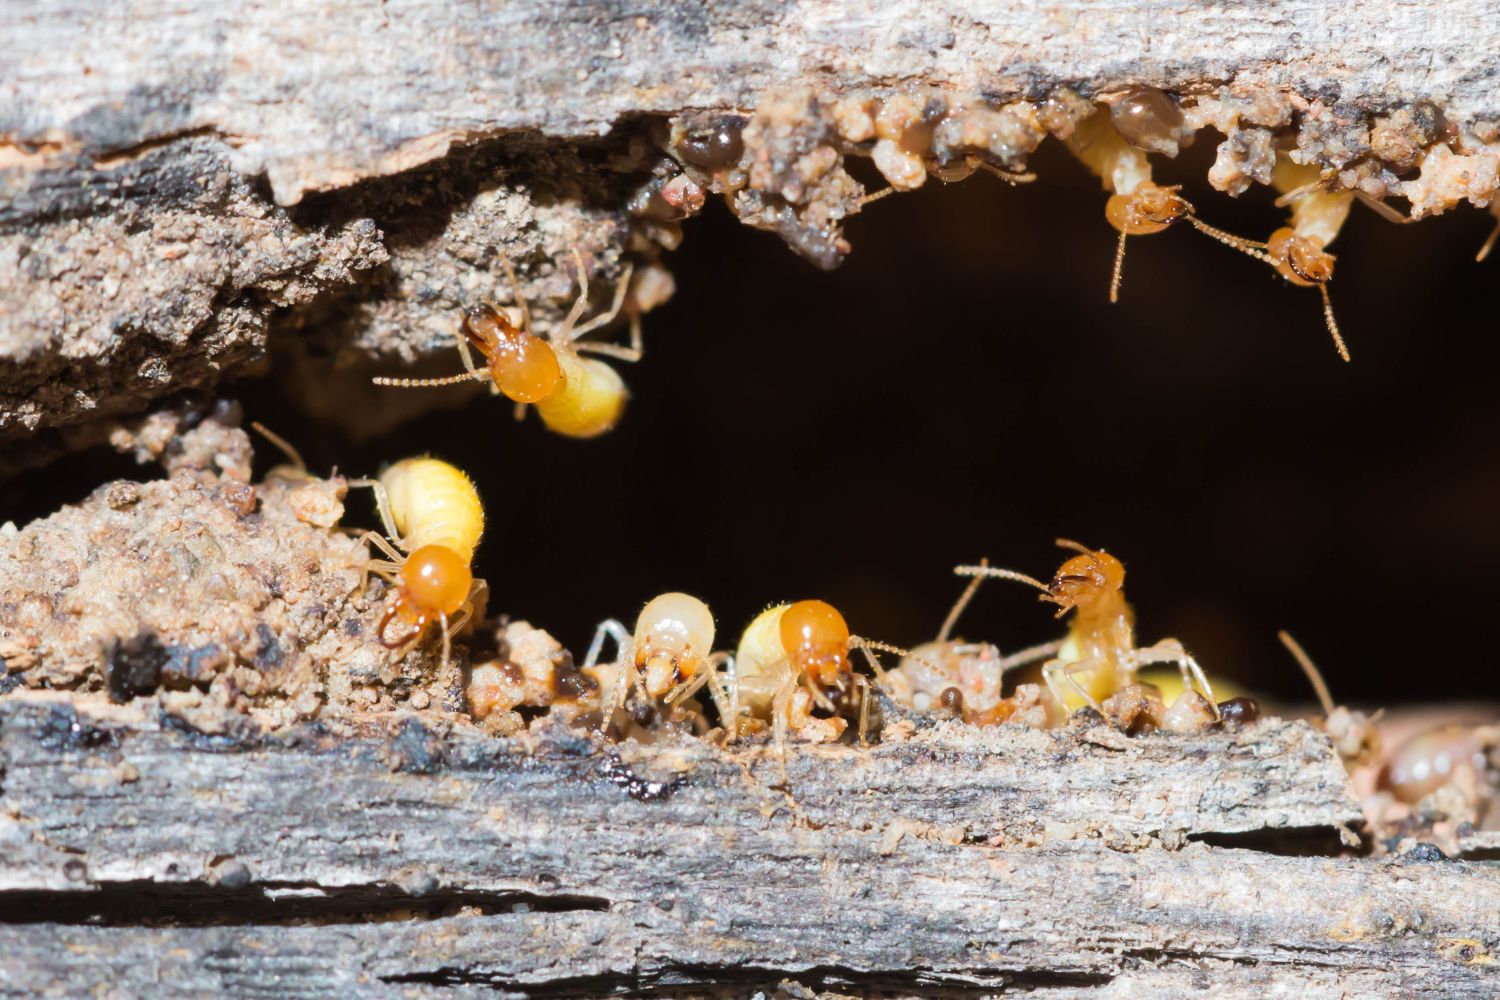 Where do Termites Come From?